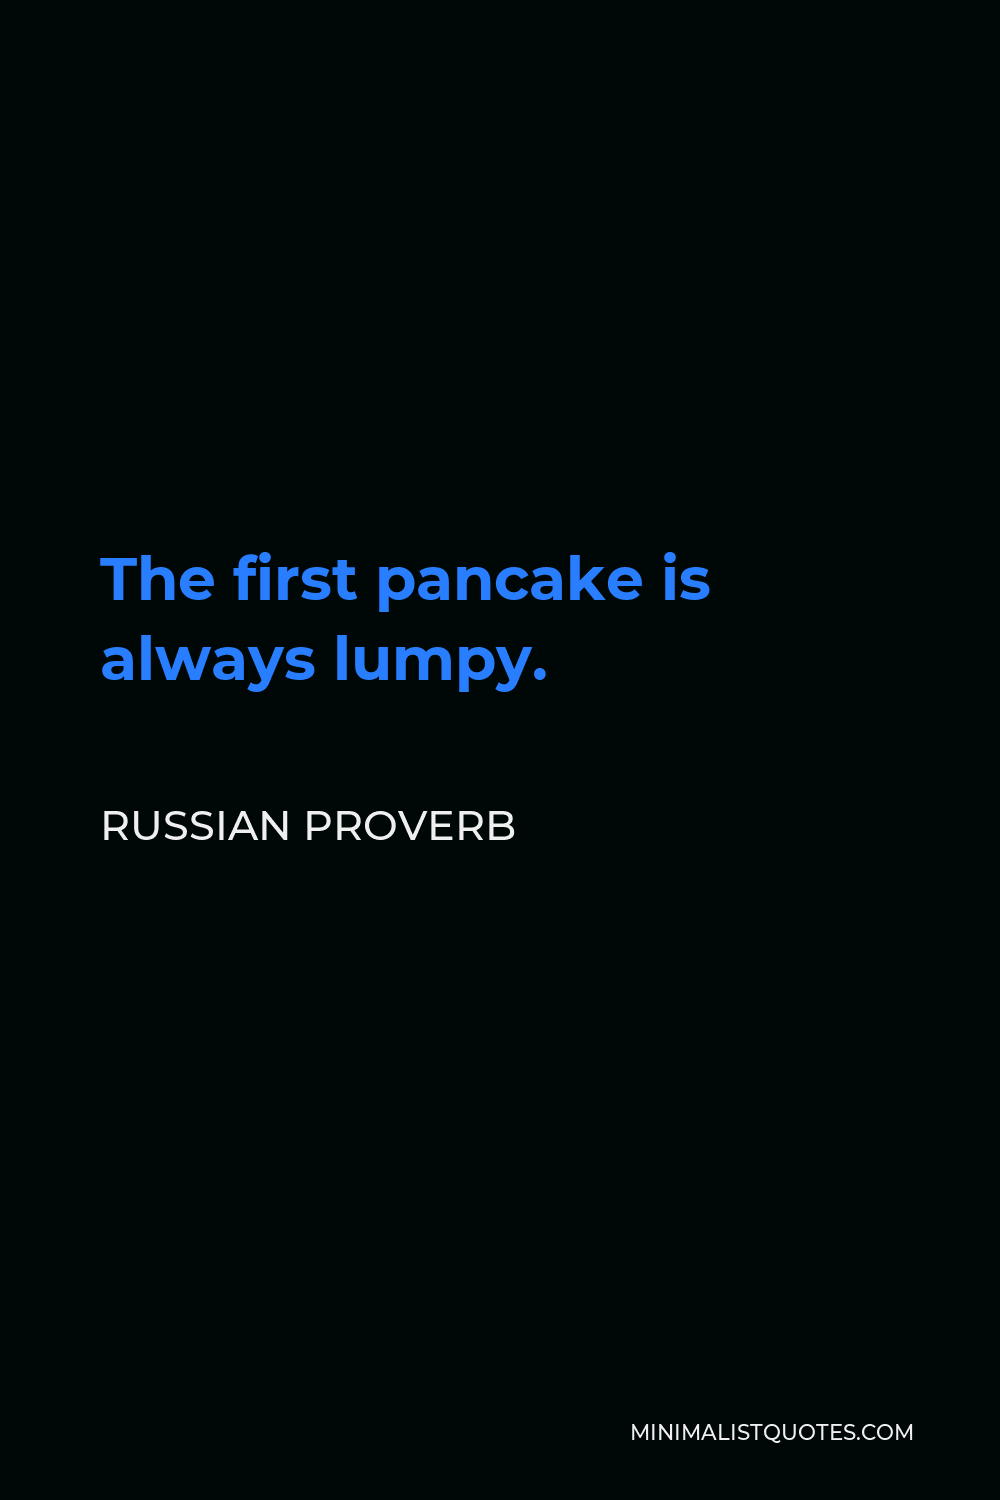 Russian Proverb Quote - The first pancake is always lumpy.